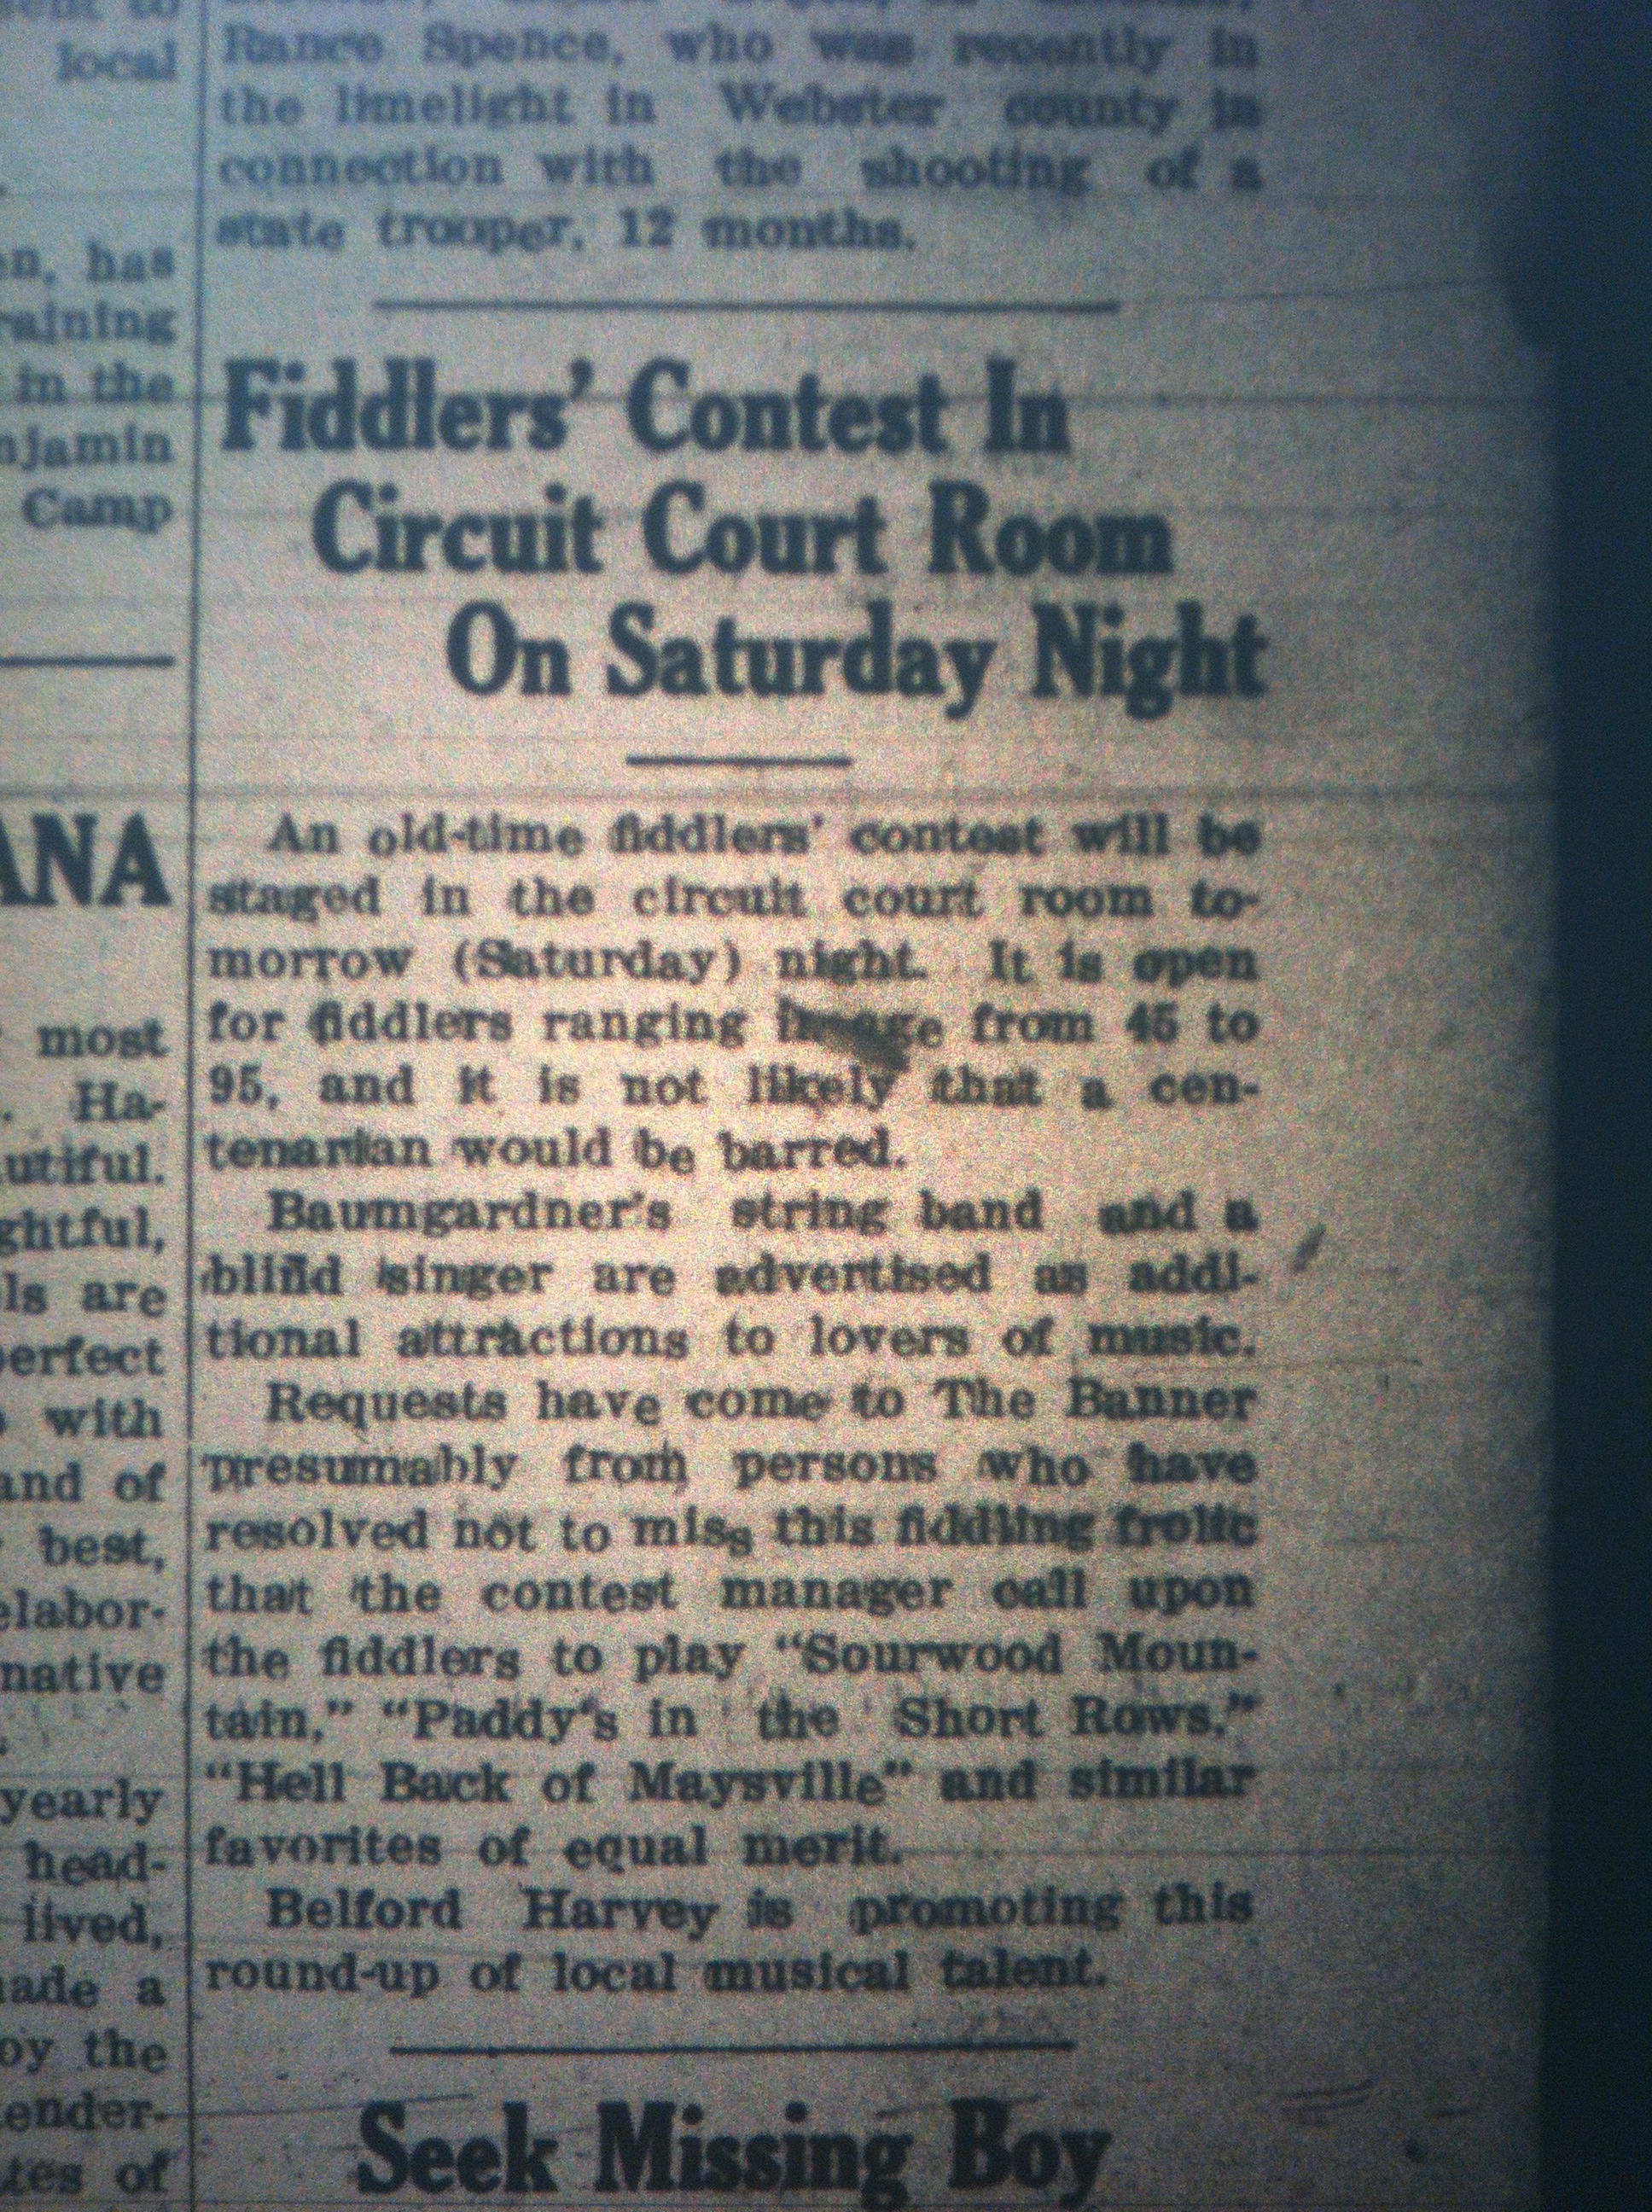 Fiddlers' Contest at Logan Circuit Court Room LB 04.29.1927.JPG